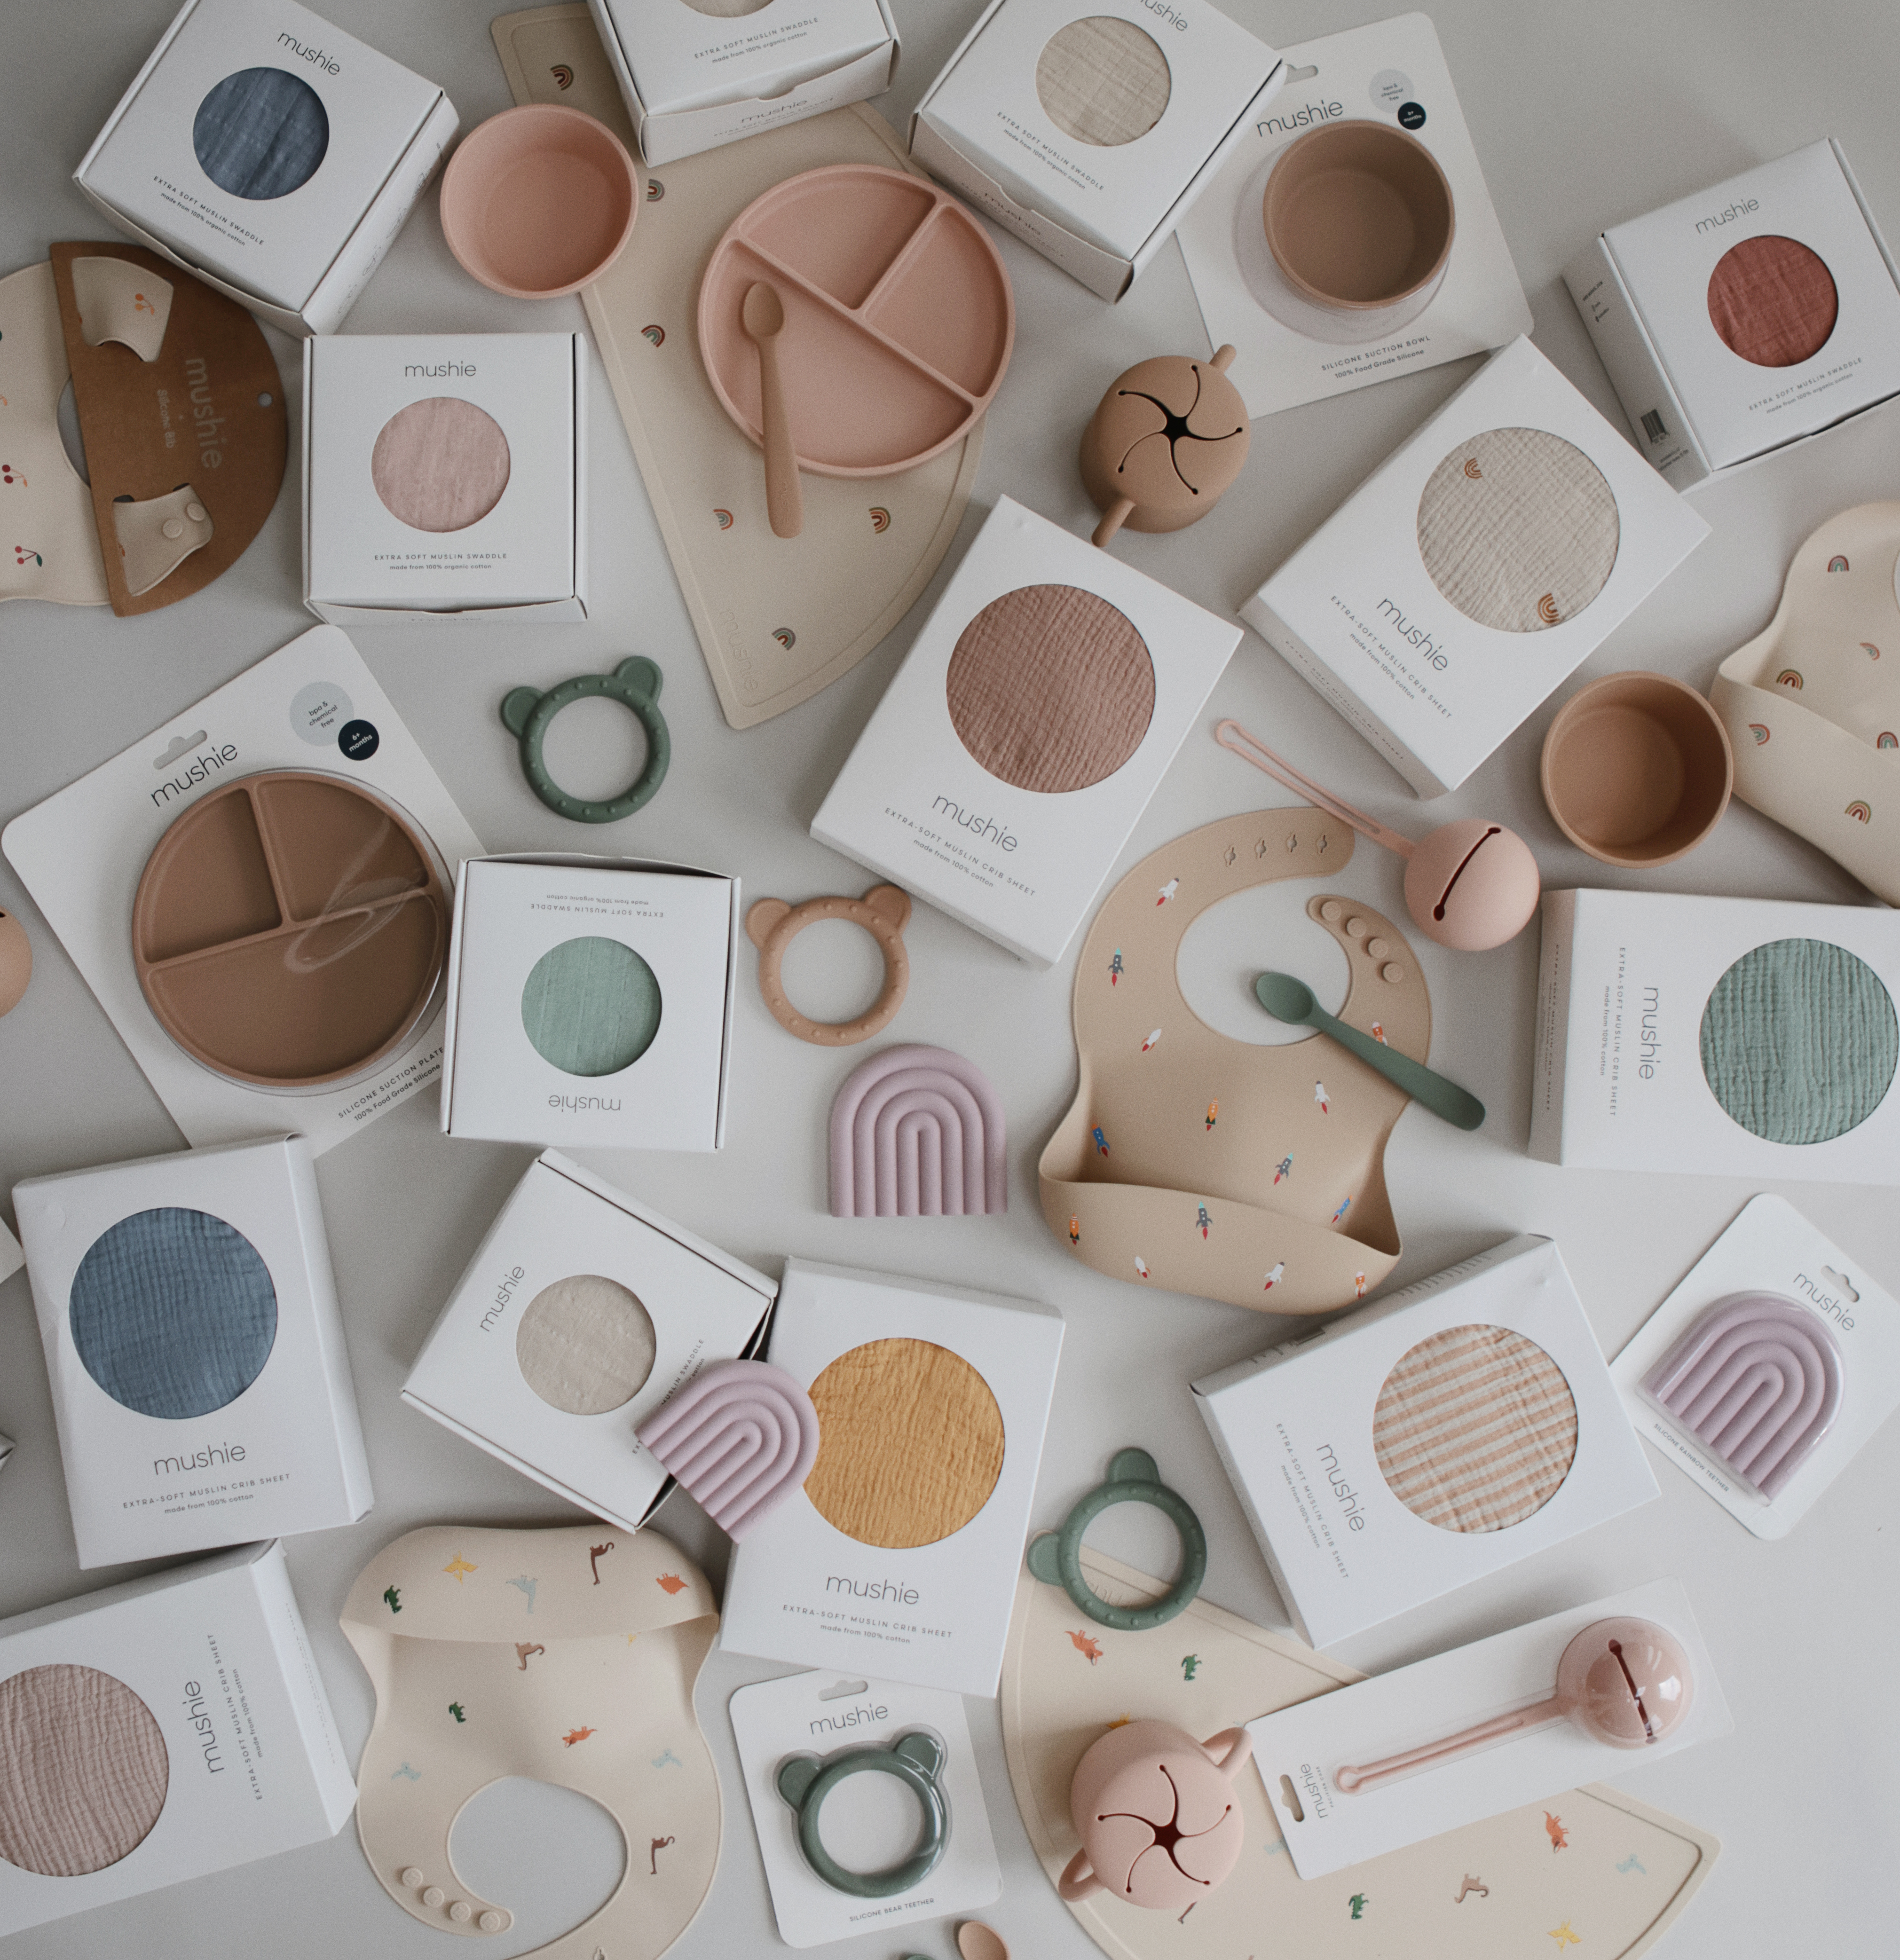 Mushie is Becoming the Baby Industry Standard for Products